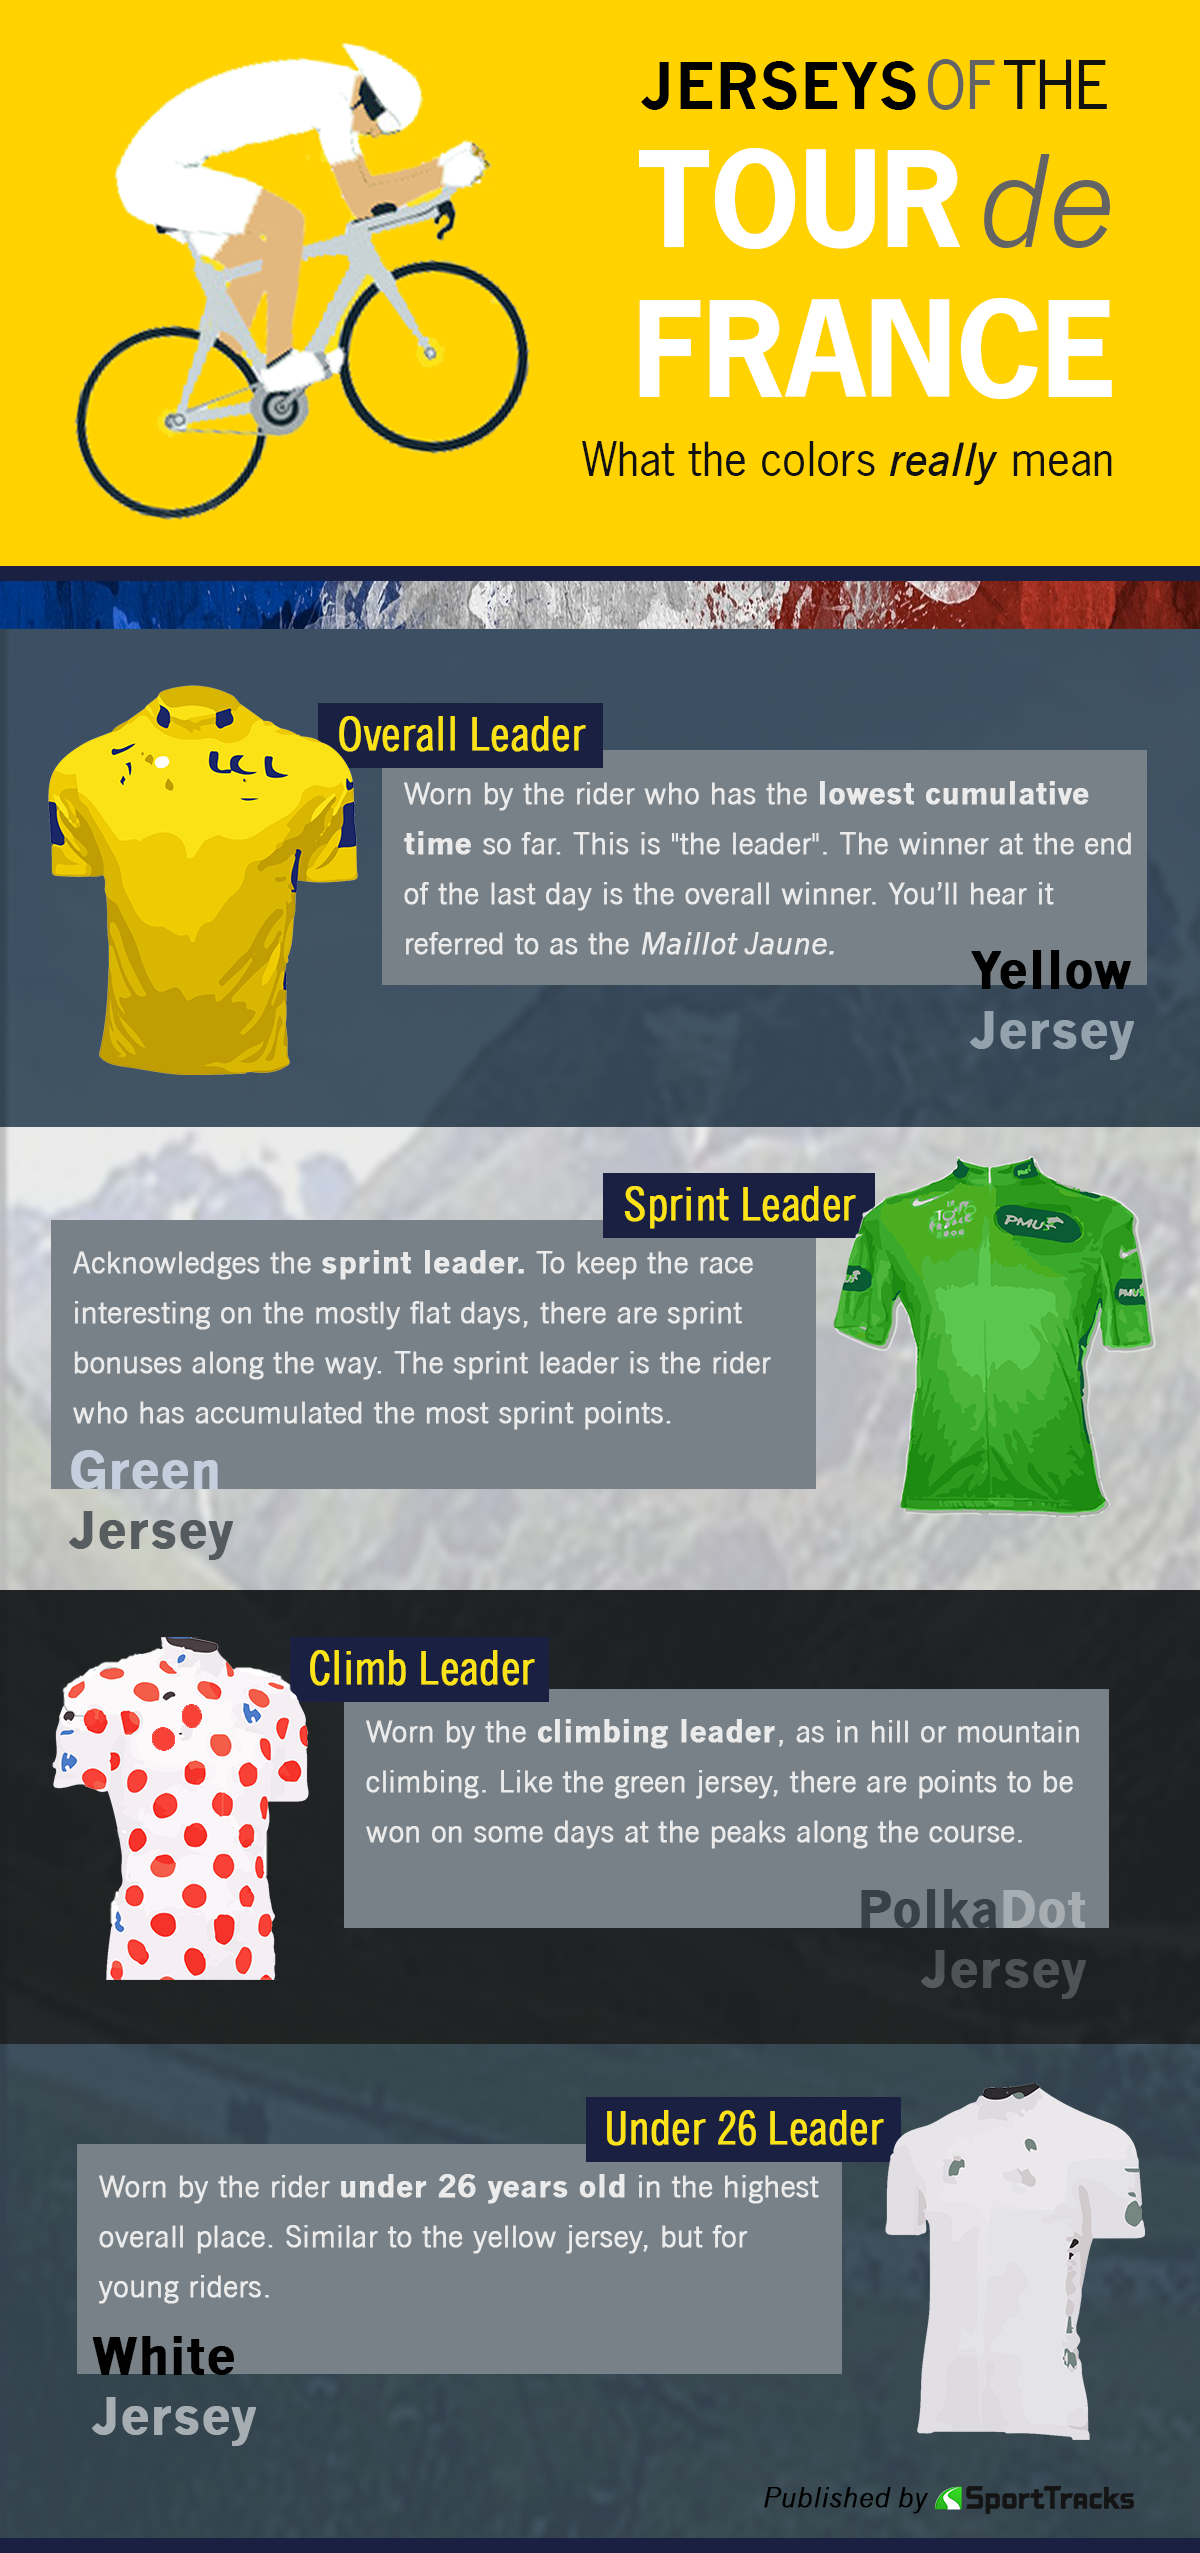 green jersey tour de france meaning